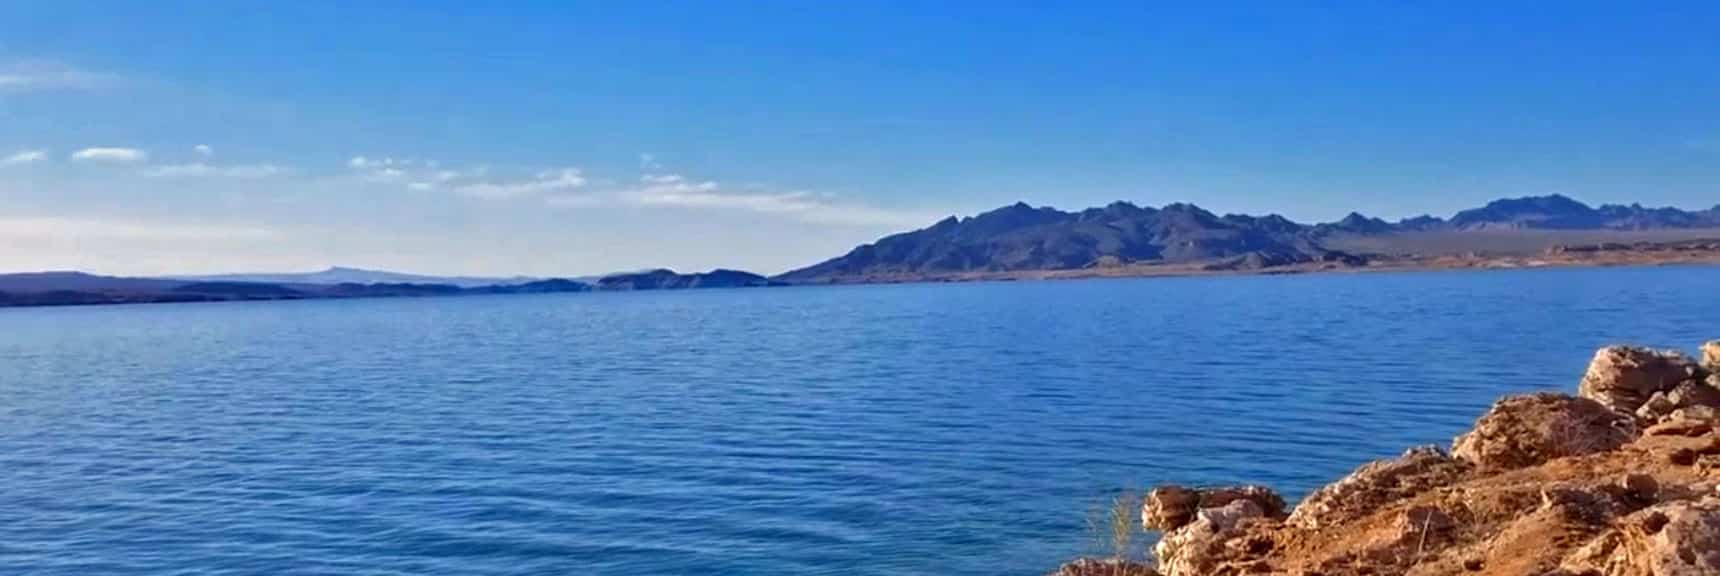 Overton Arm of Lake Mead in Lake Mead National Park Nevada